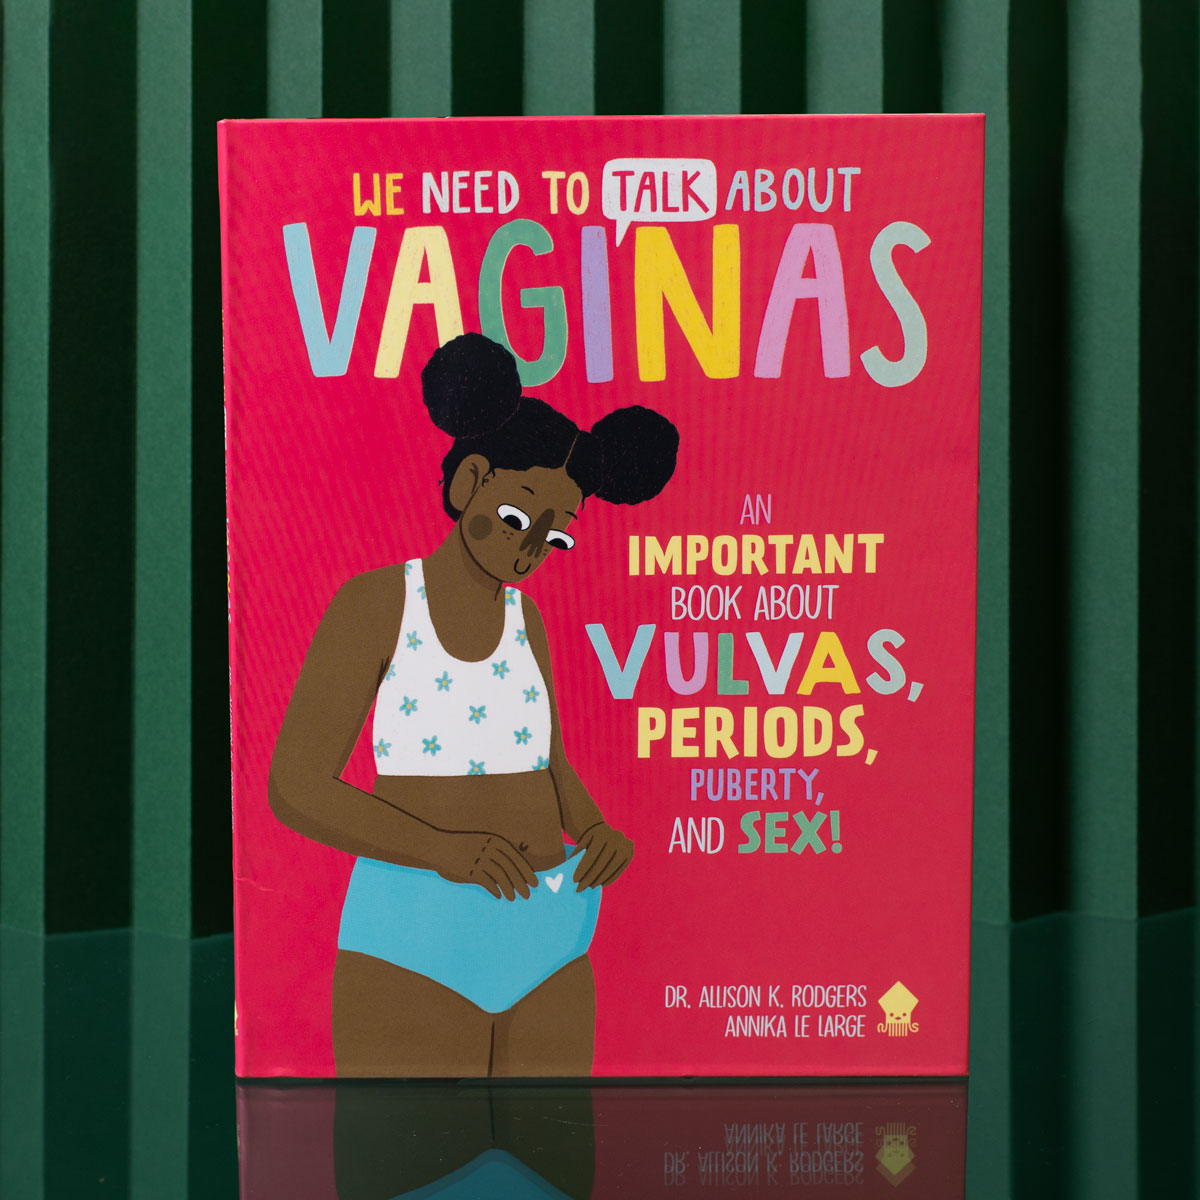 we need to talk about vaginas book cover in red on green background